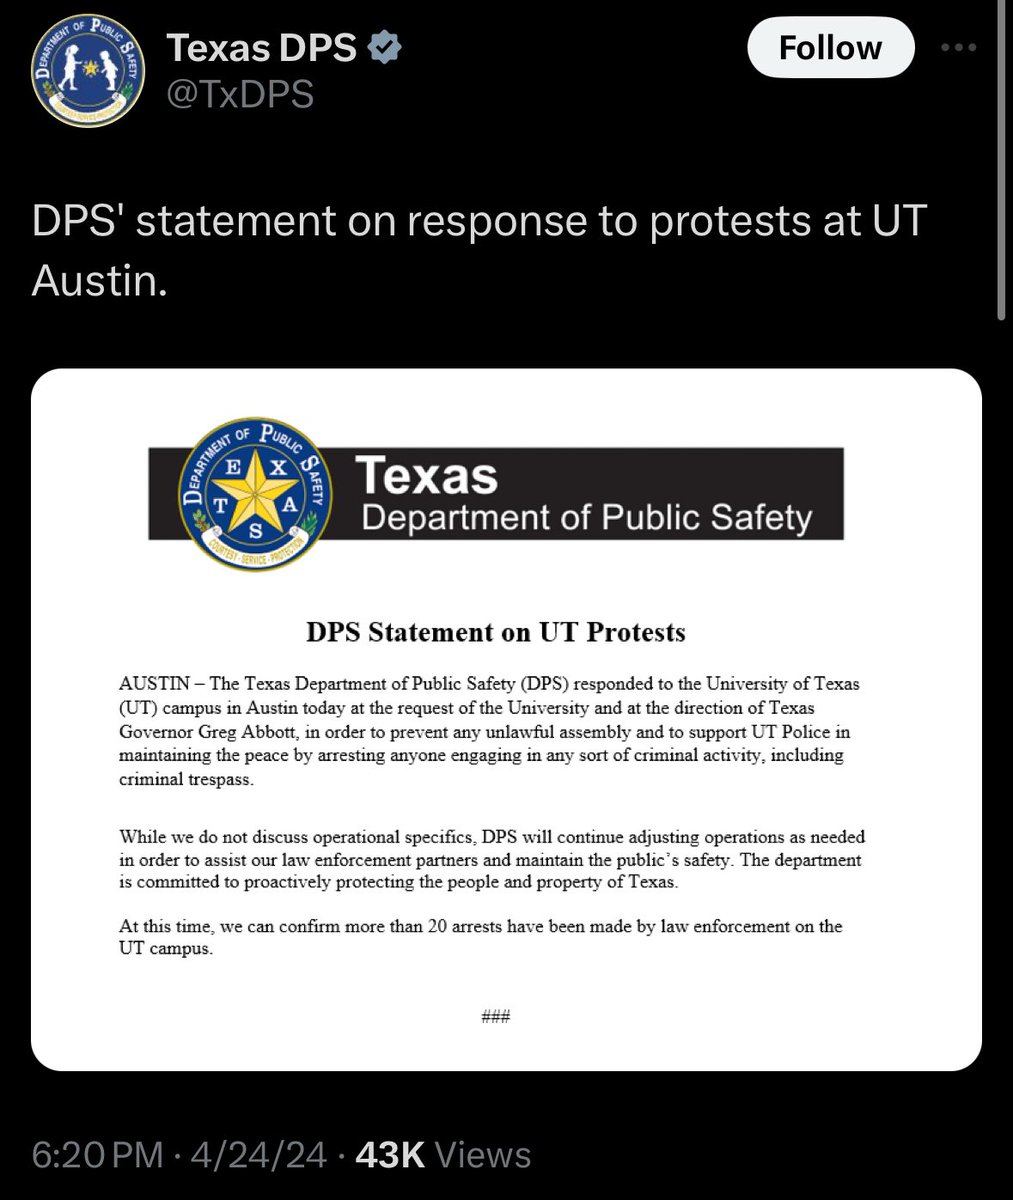 Just so everyone is clear, the Governor of Texas announces he ordered the protestors at the public university arrested because he is discriminating against their viewpoint, and the police confirm they acted at his instance.